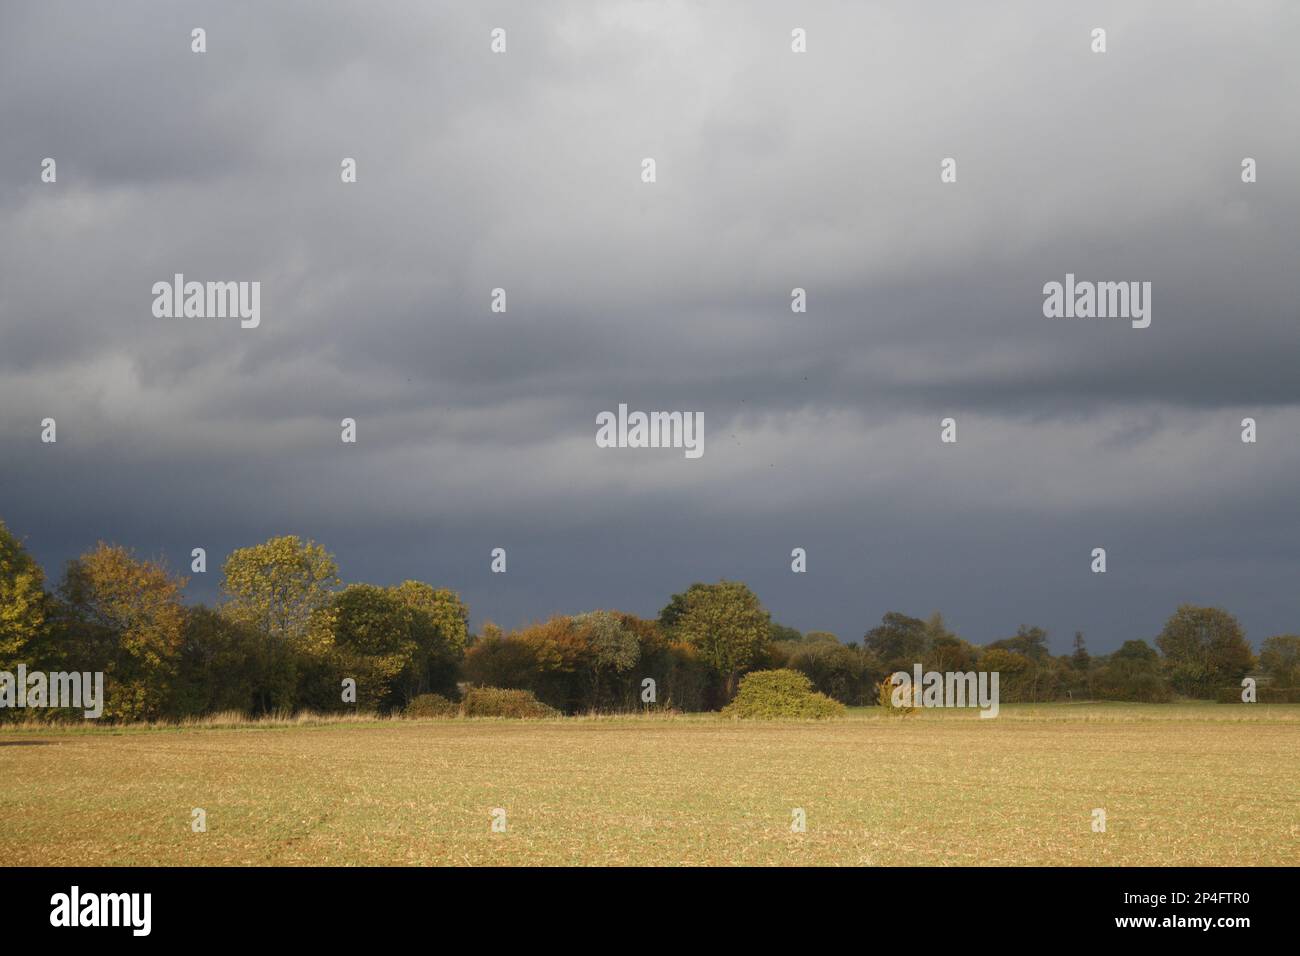 View of cultivated arable field and hedgerow, with approaching stormclouds, Bacton, Suffolk, England, United Kingdom Stock Photo